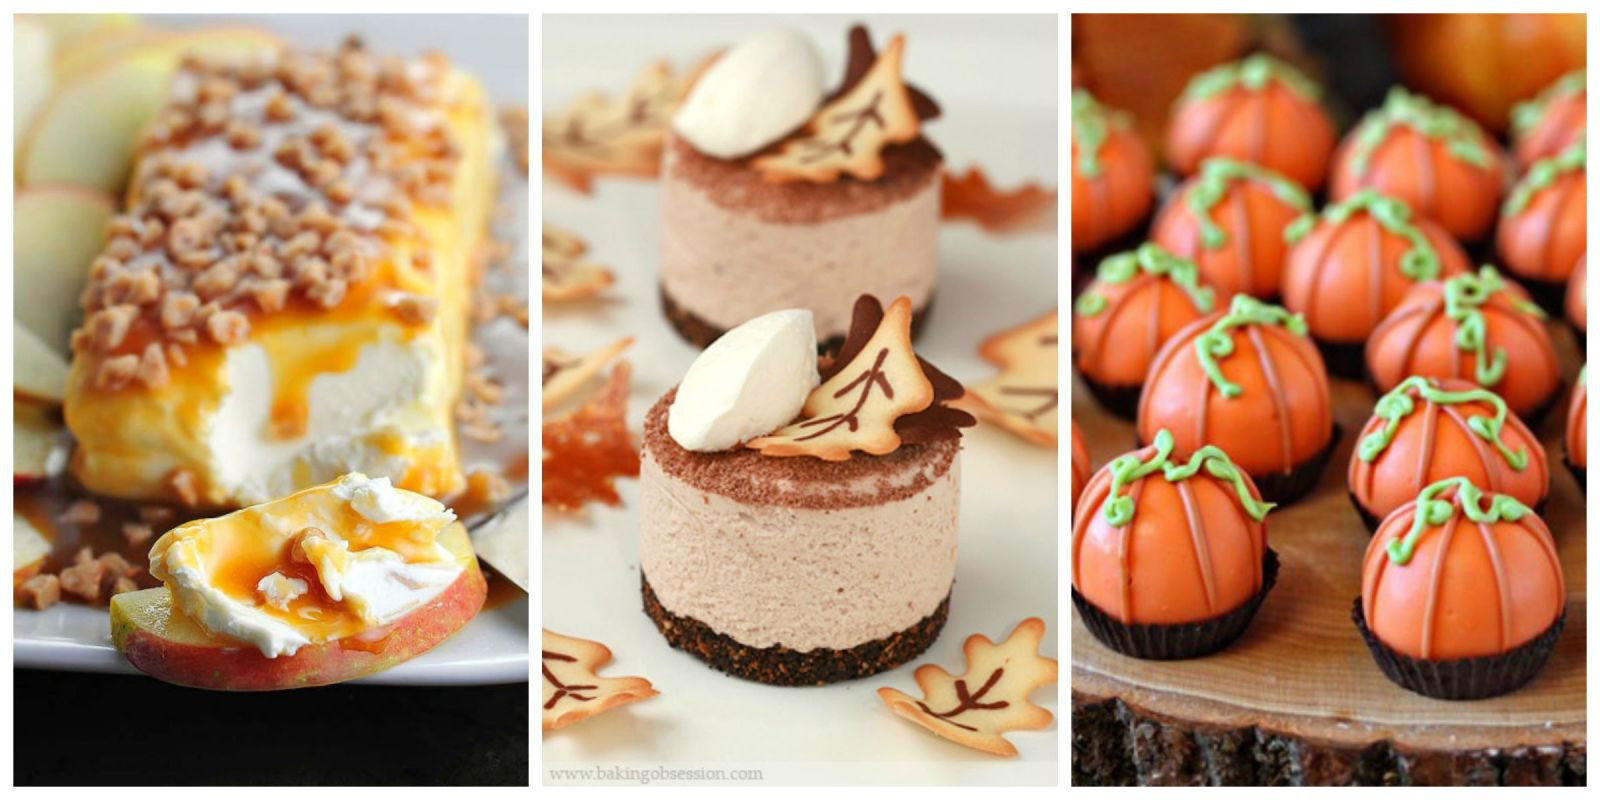 Easy Fall Desserts For A Crowd
 35 Easy Fall Dessert Recipes Best Treats for Autumn Parties